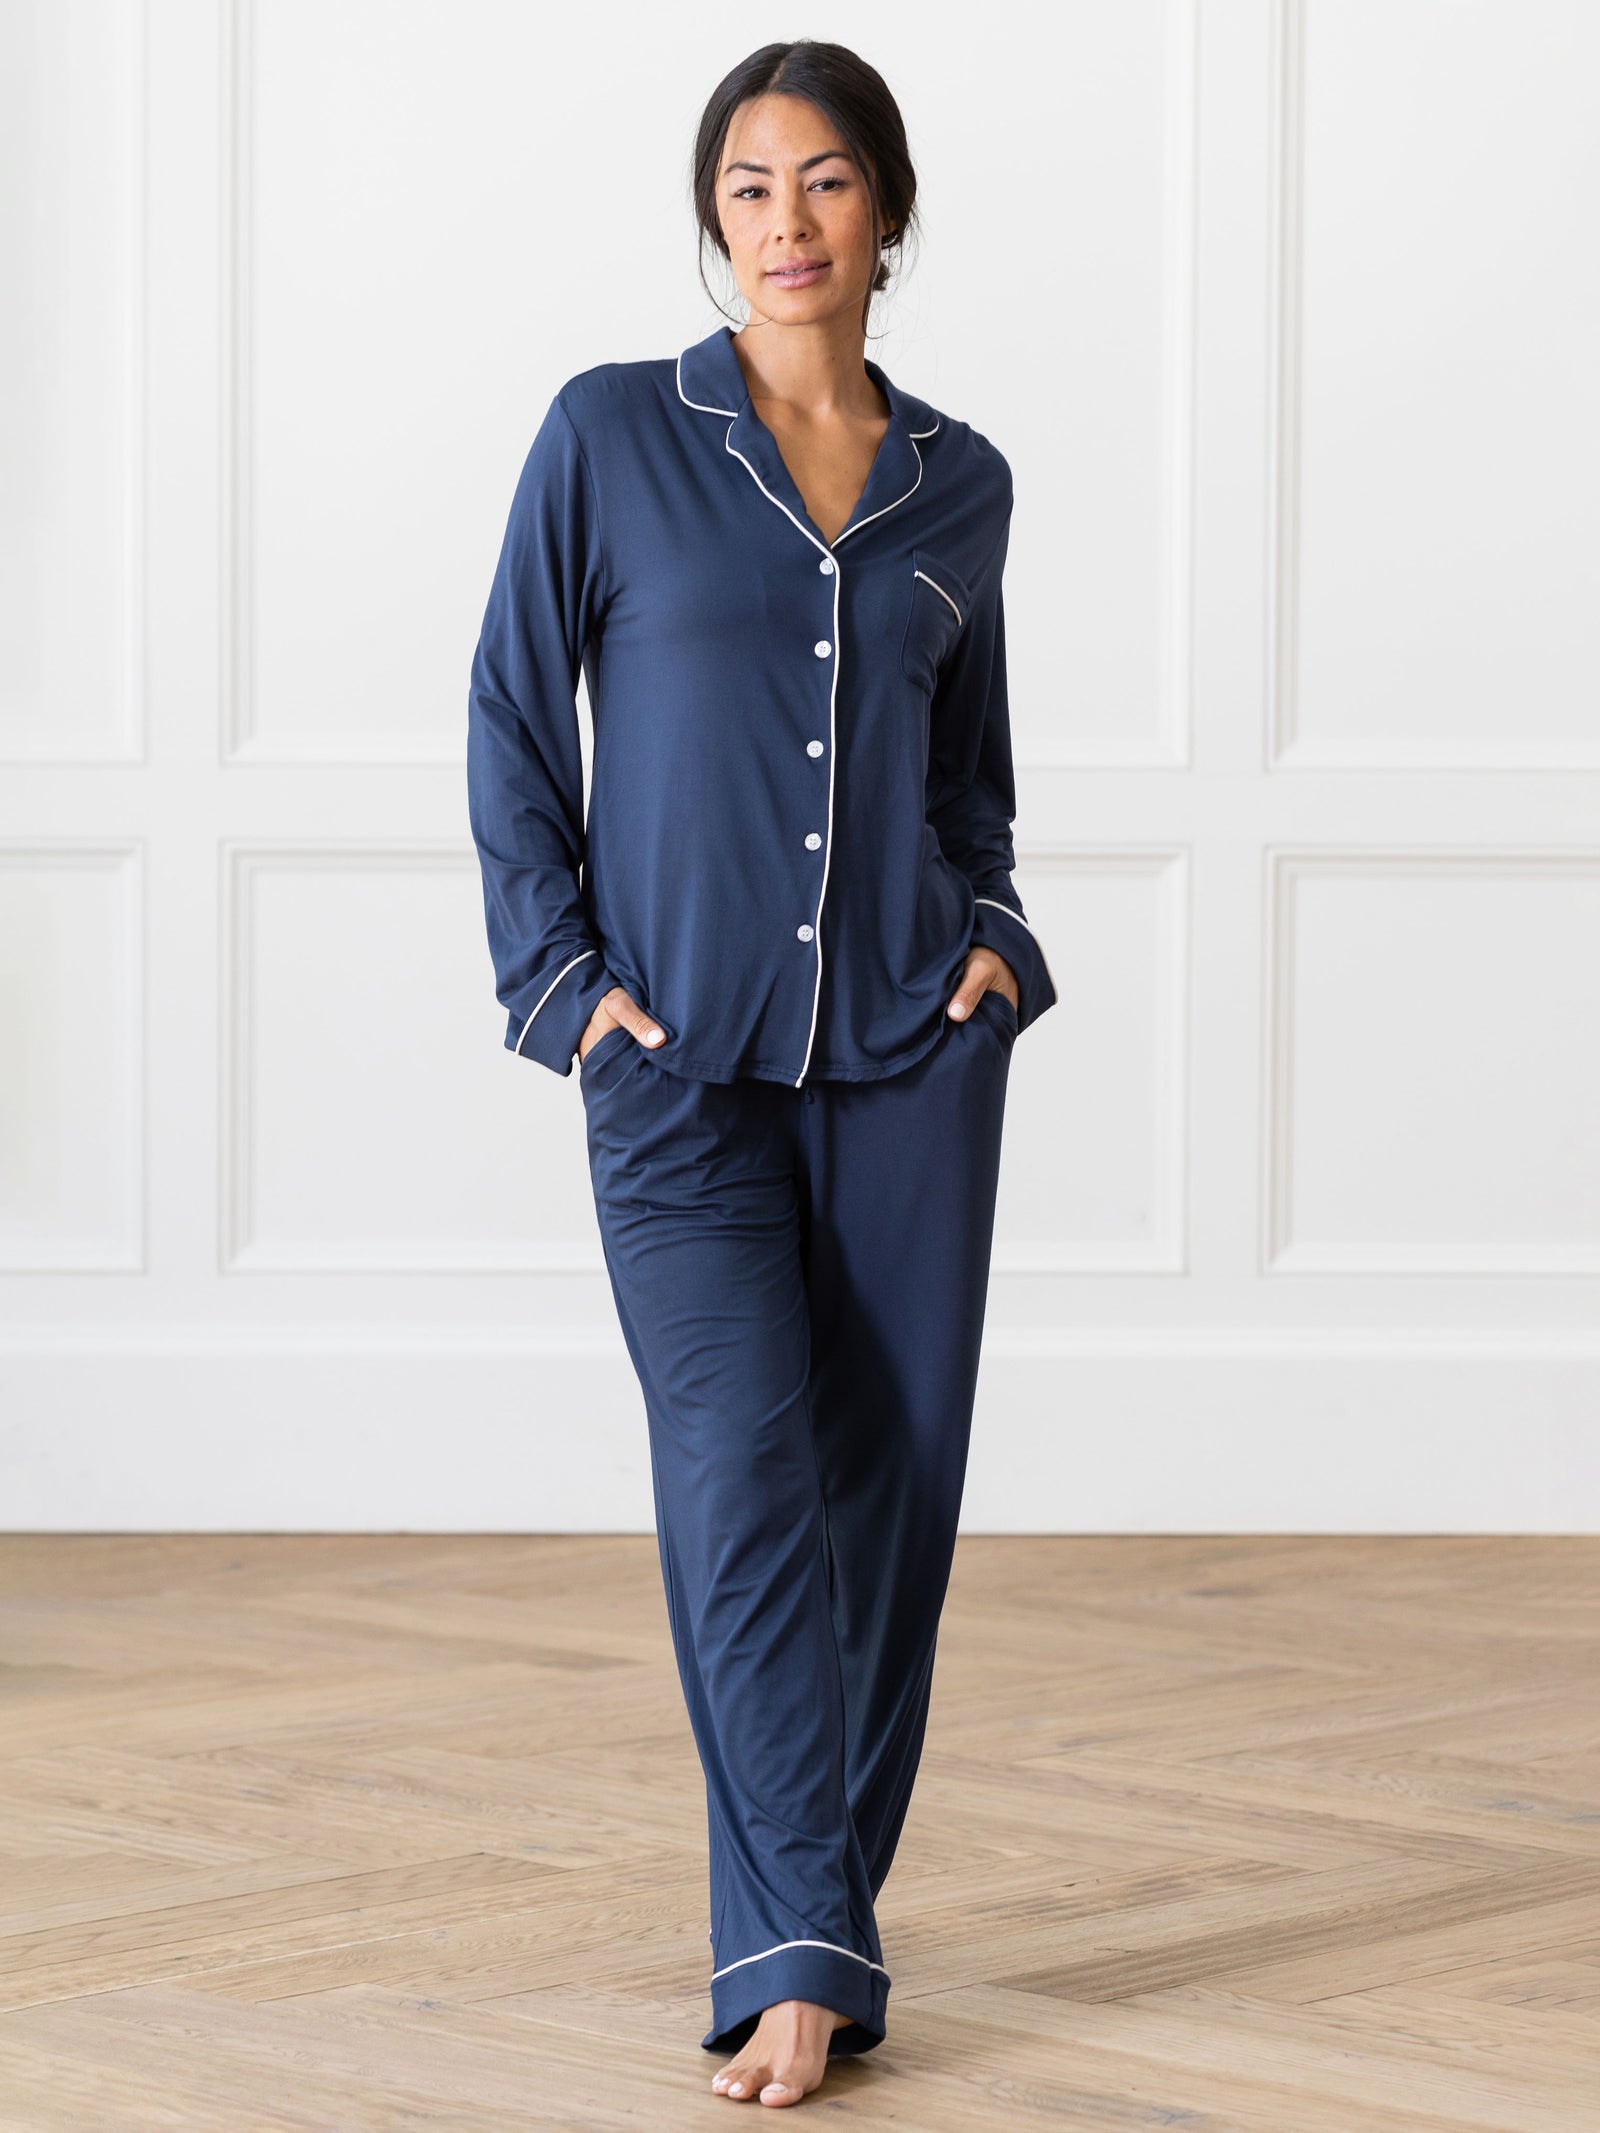 Navy Long Sleeve Pajama Set modeled by a woman. The photo was taken in a light setting, showing off the colors and lines of the pajamas. 